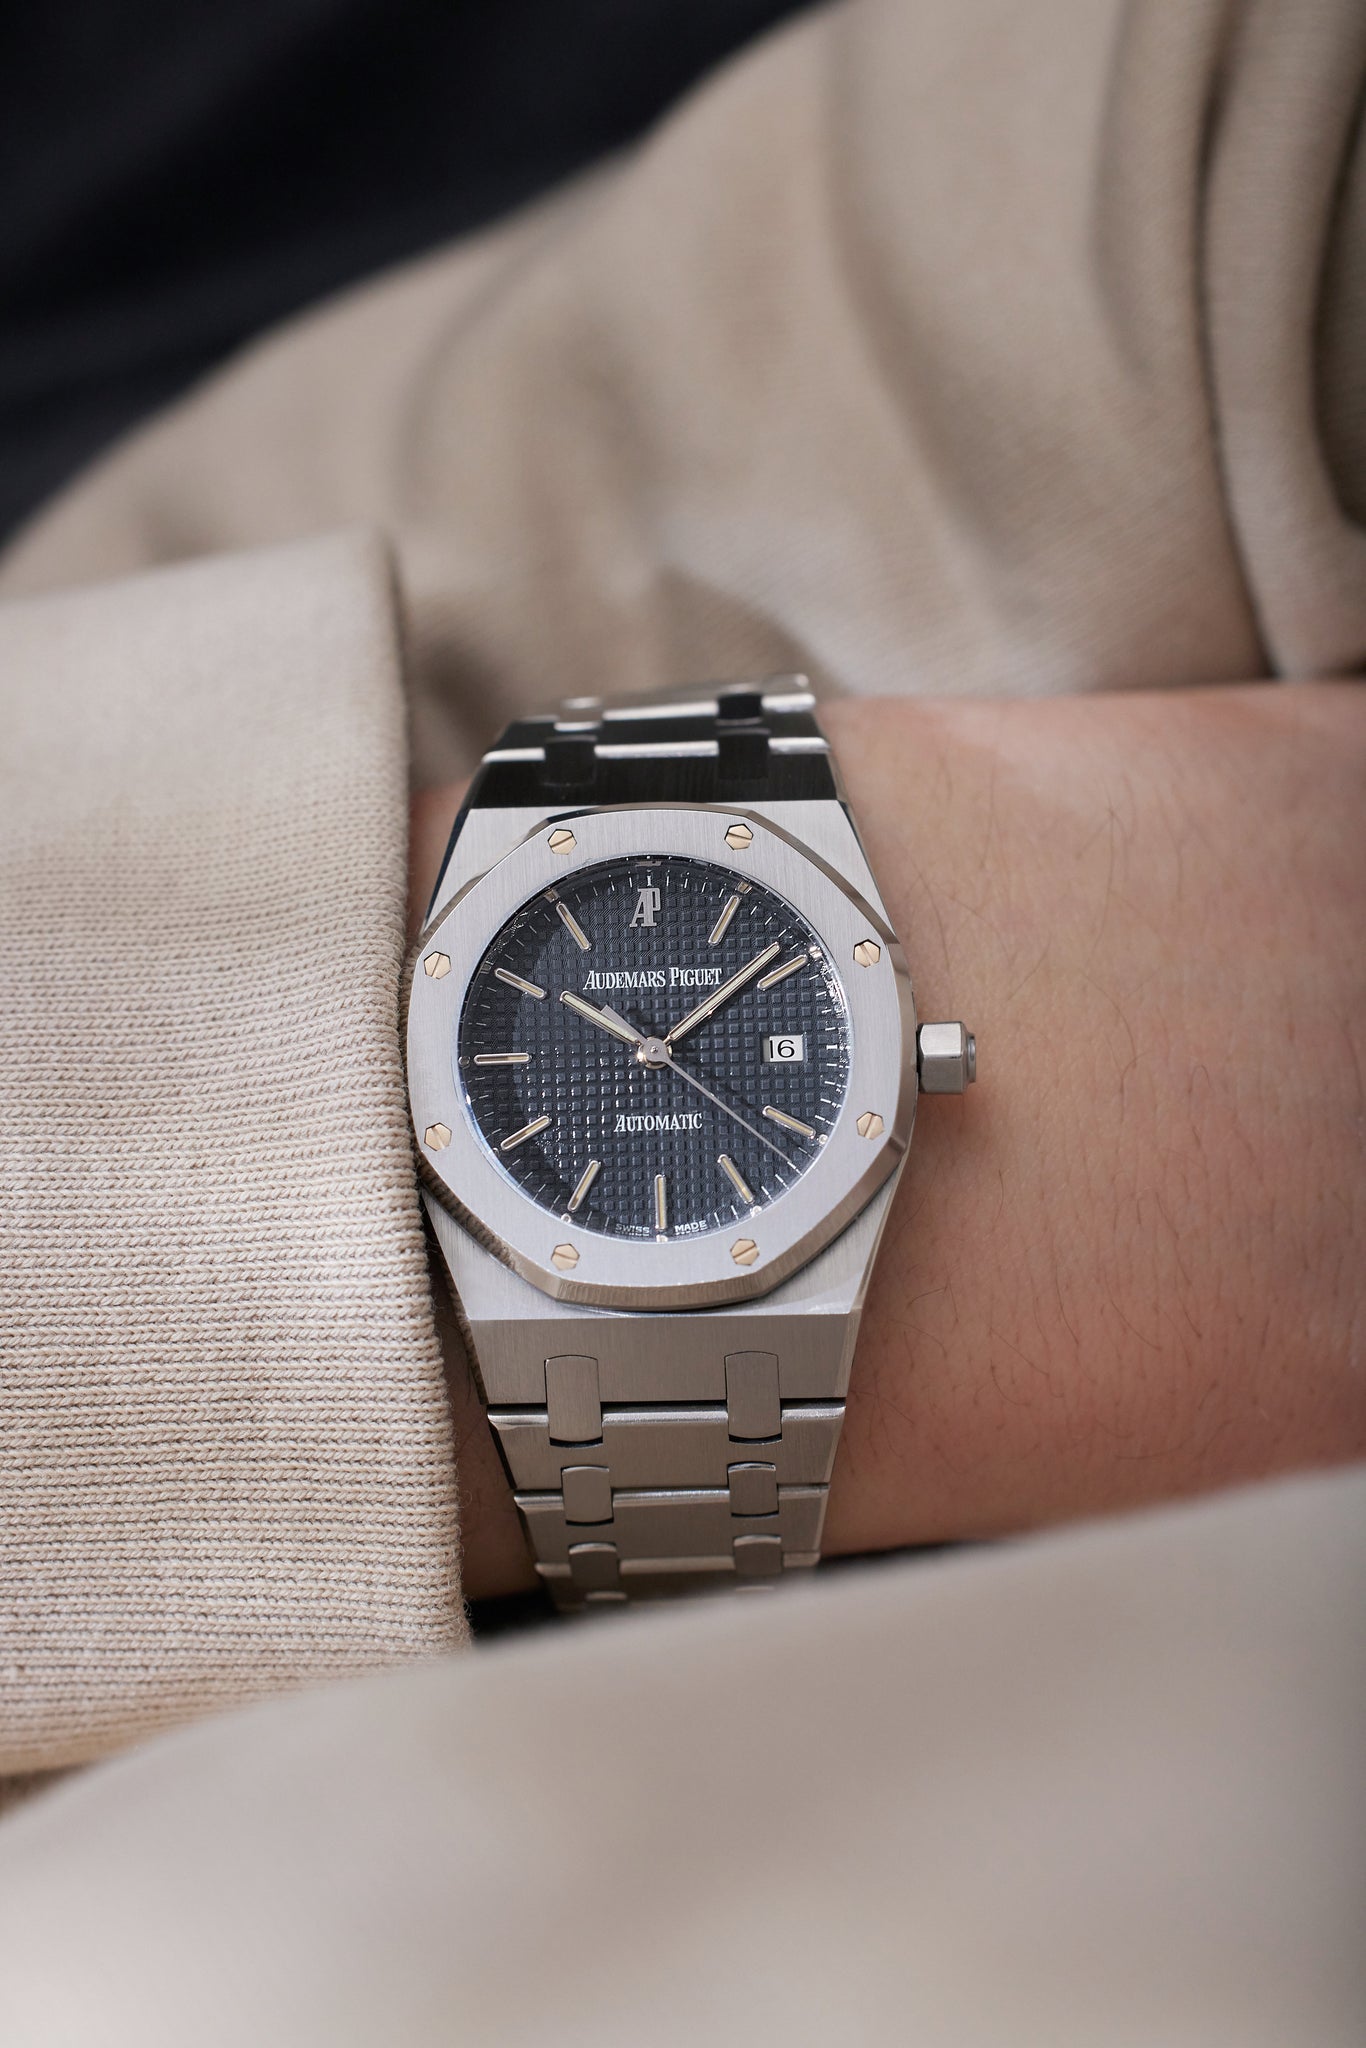 on the wrist Audemars Piguet | Royal Oak | 15000ST/O/0789ST/01 | Stainless Steel | preowned watch at A Collected Man London